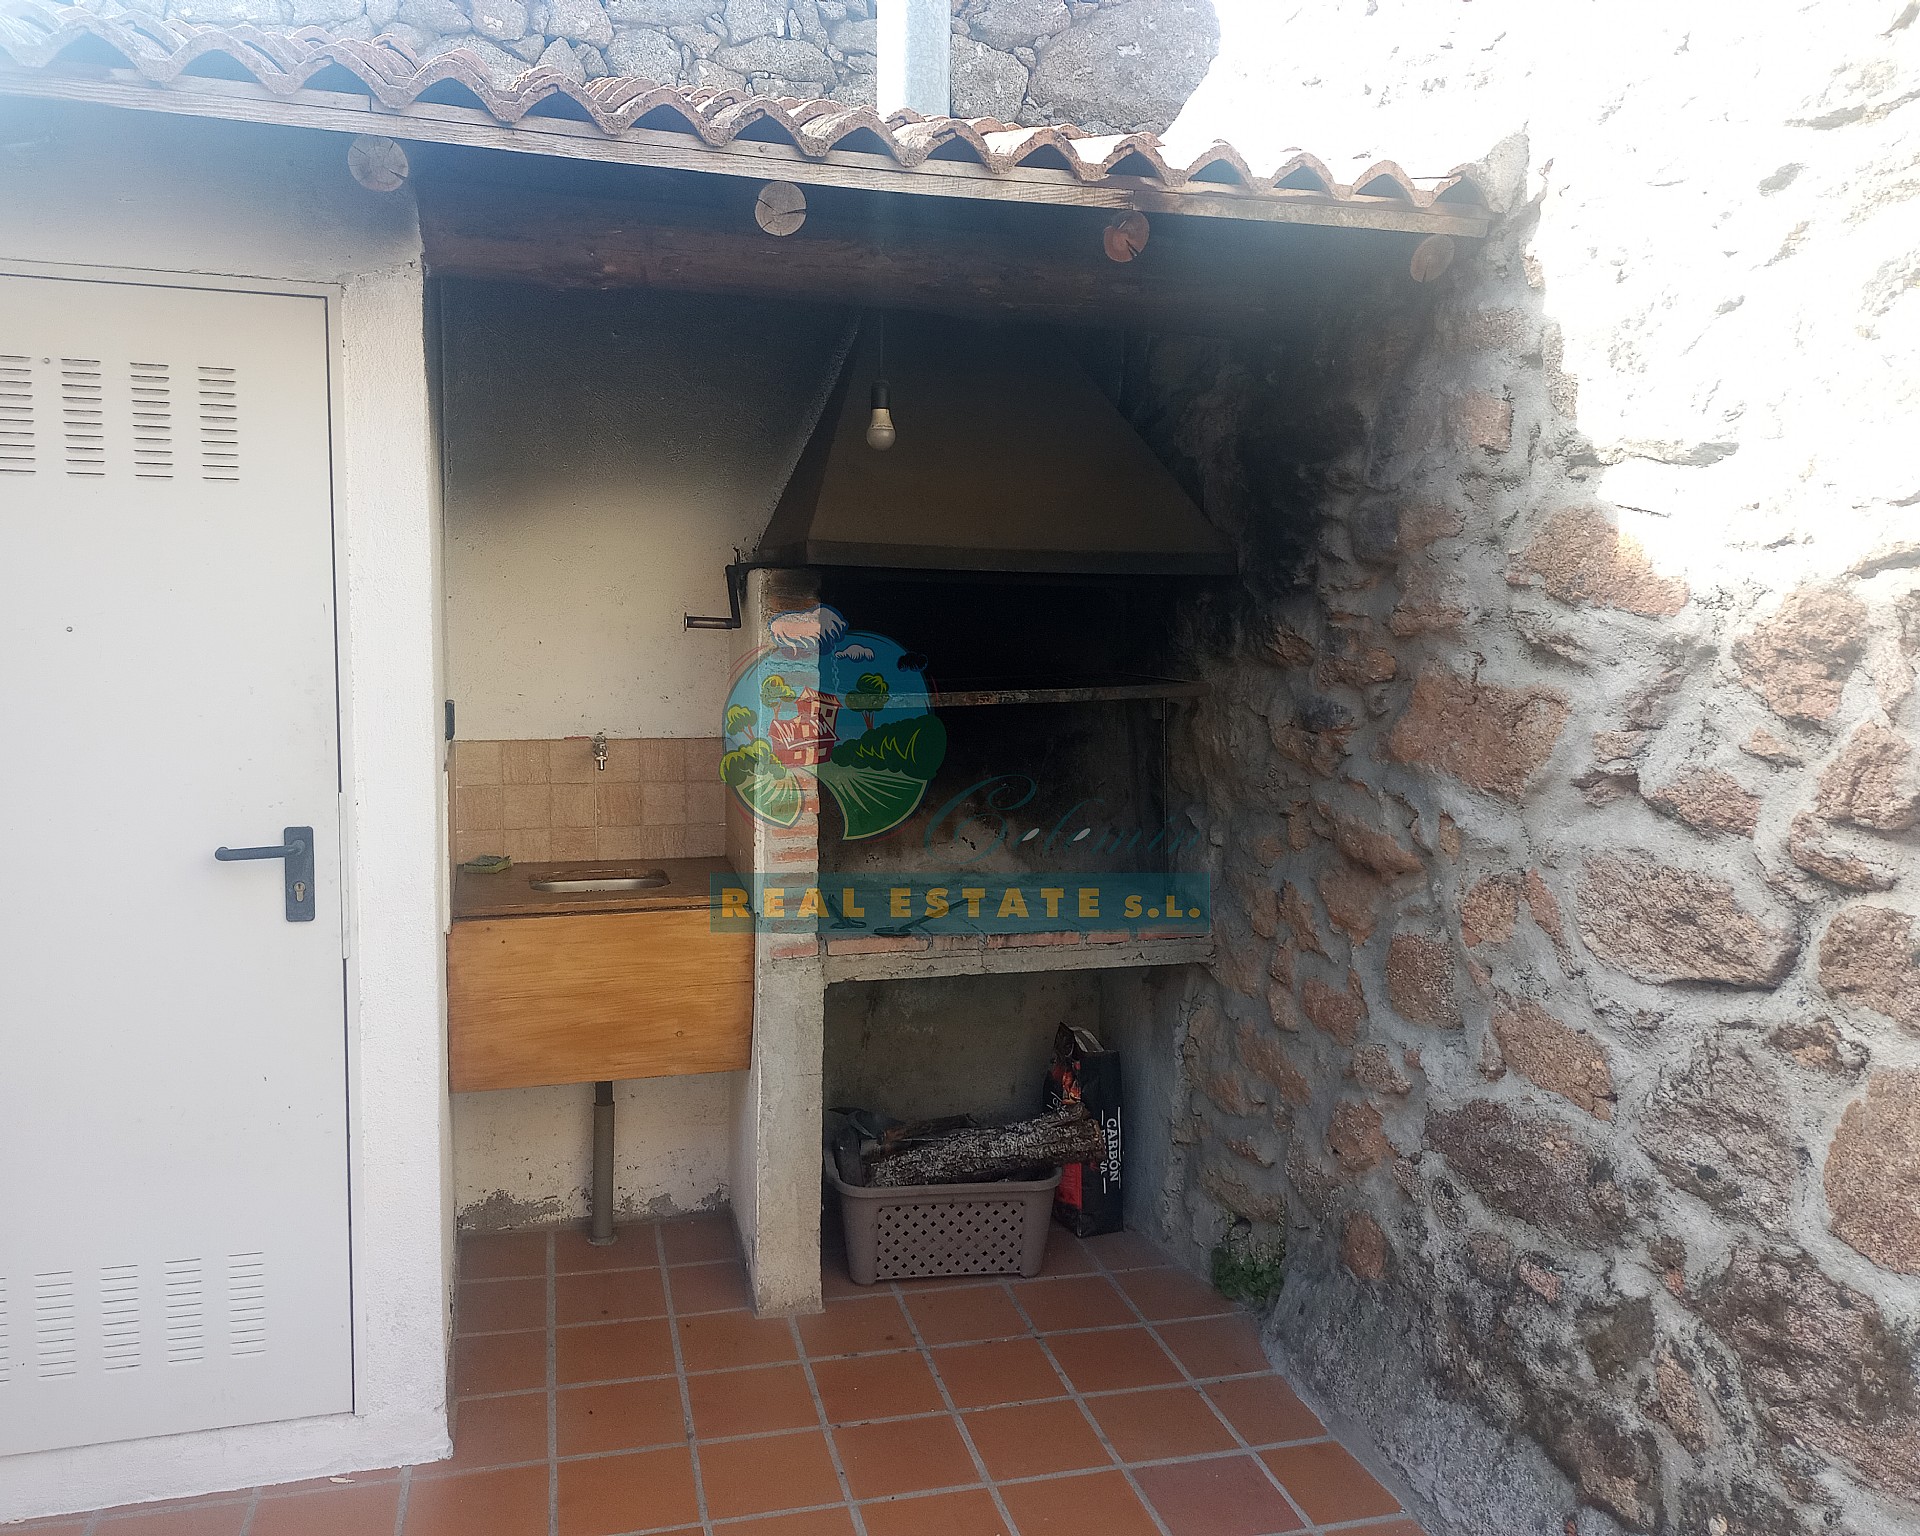 Restored village house with tourist business in Neila de San Miguel. 